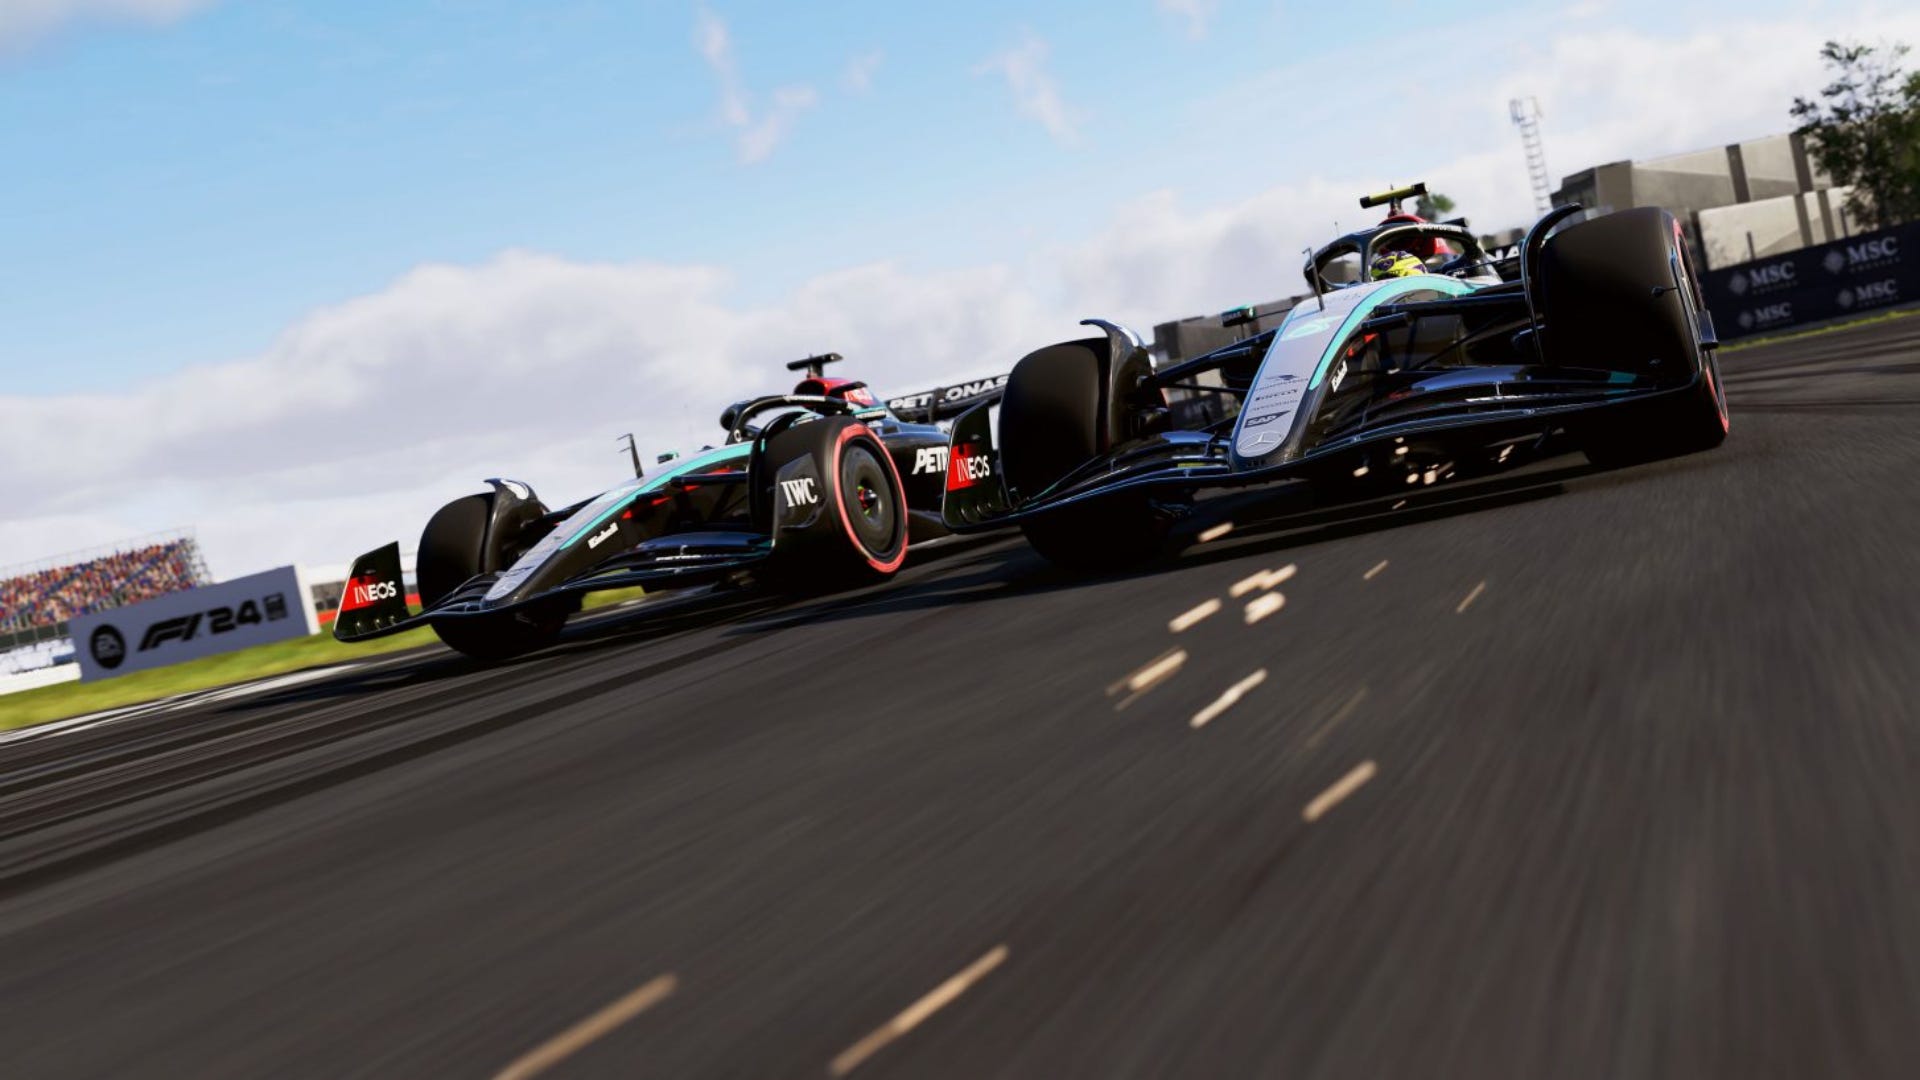 EA Sports F1 24 Career Mode preview - get ready to build on Nigel Mansell's moustache legacy, if you want to